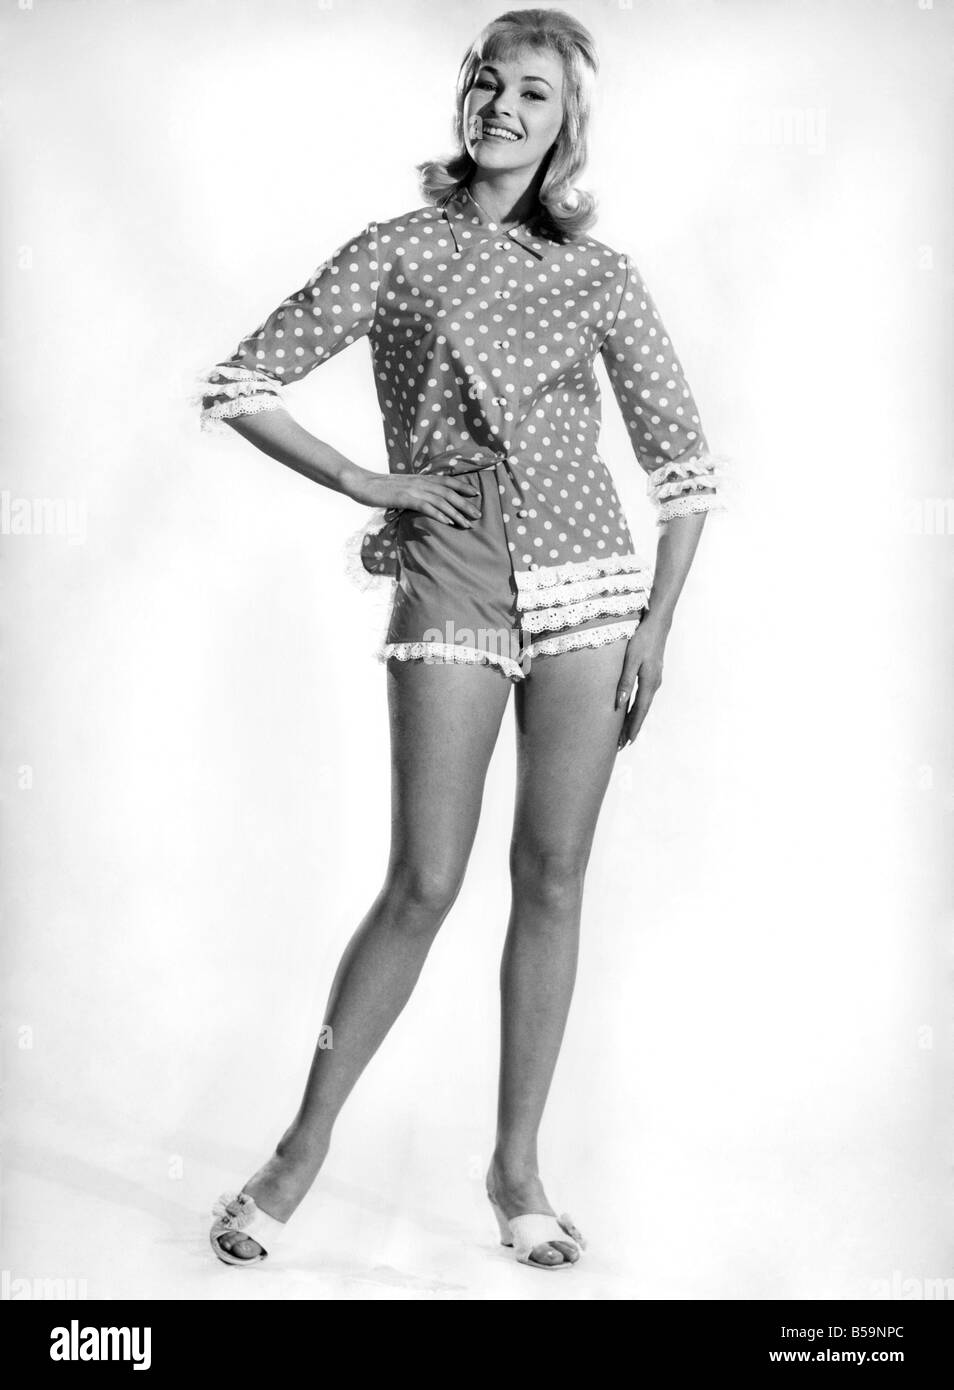 Model Jo Waring wearing a polka dot patterned top and three quarter ...